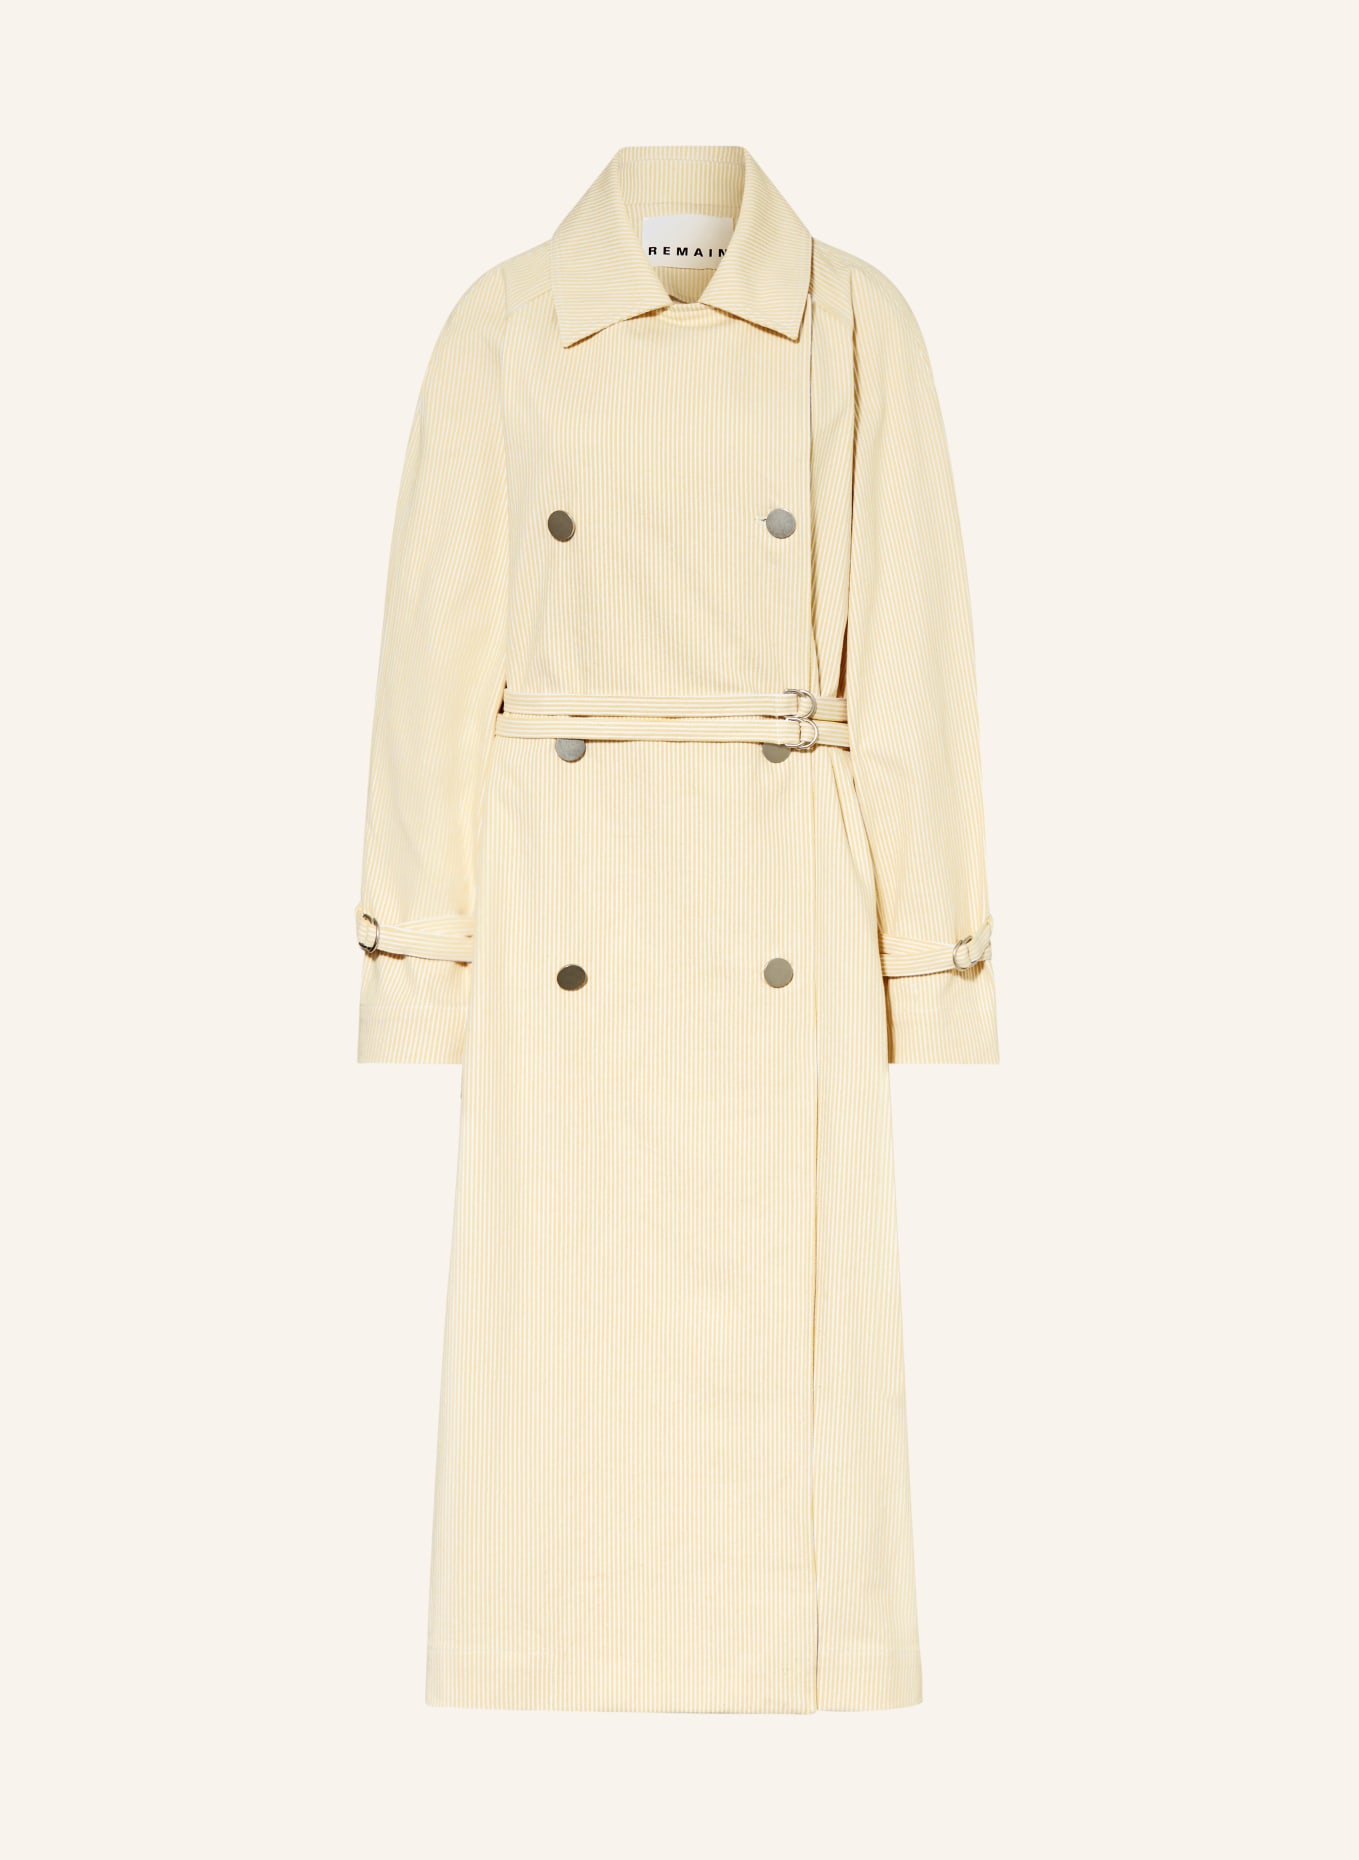 REMAIN Coat, Color: YELLOW/ WHITE (Image 1)